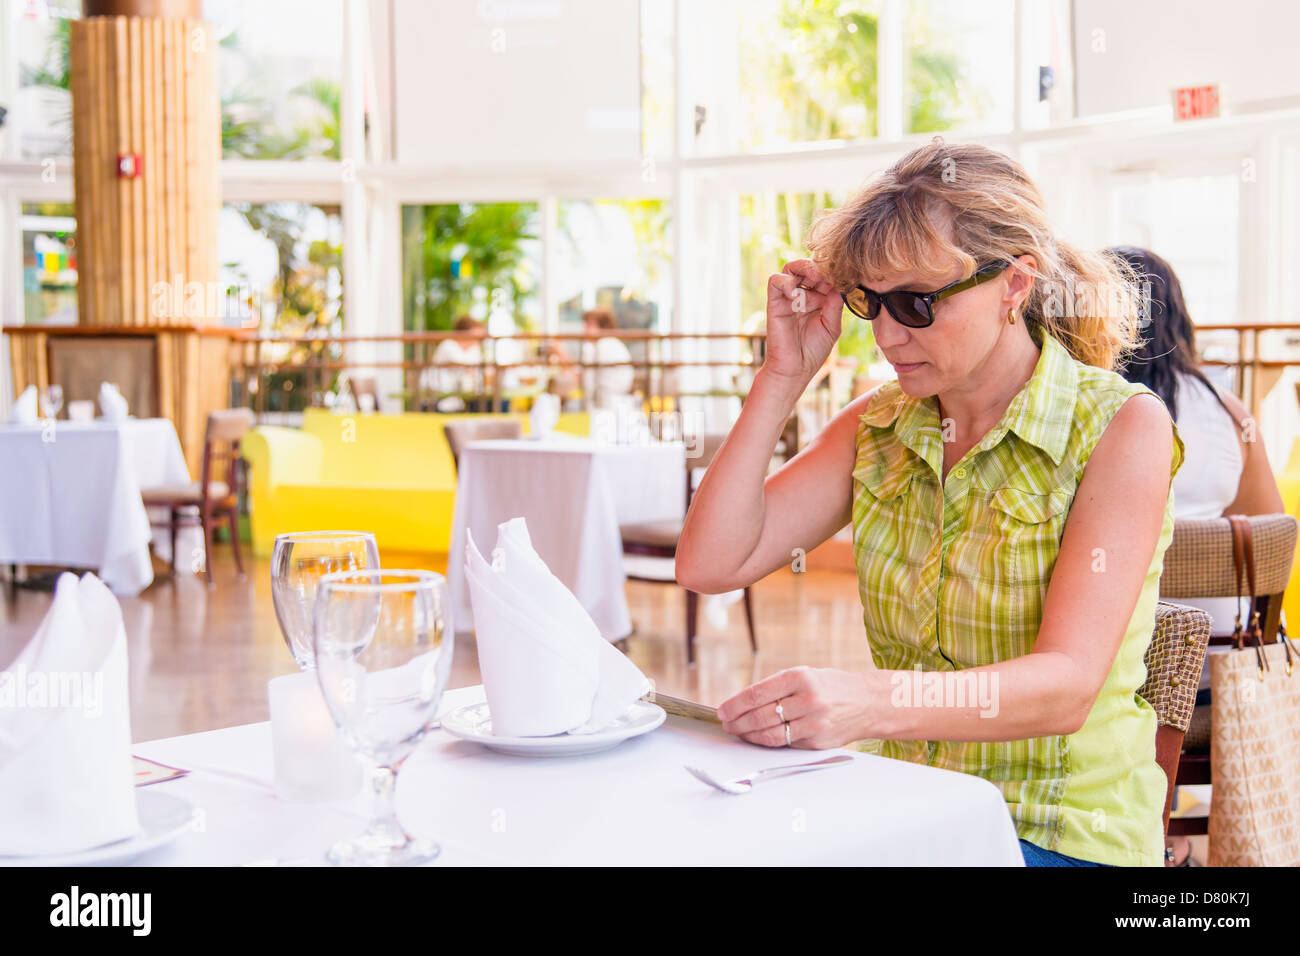 Caucasian woman of 45 years taking sunglasses off to check the menu in a bright, light flooded restaurant, Miami, Florida, USA Stock Photo